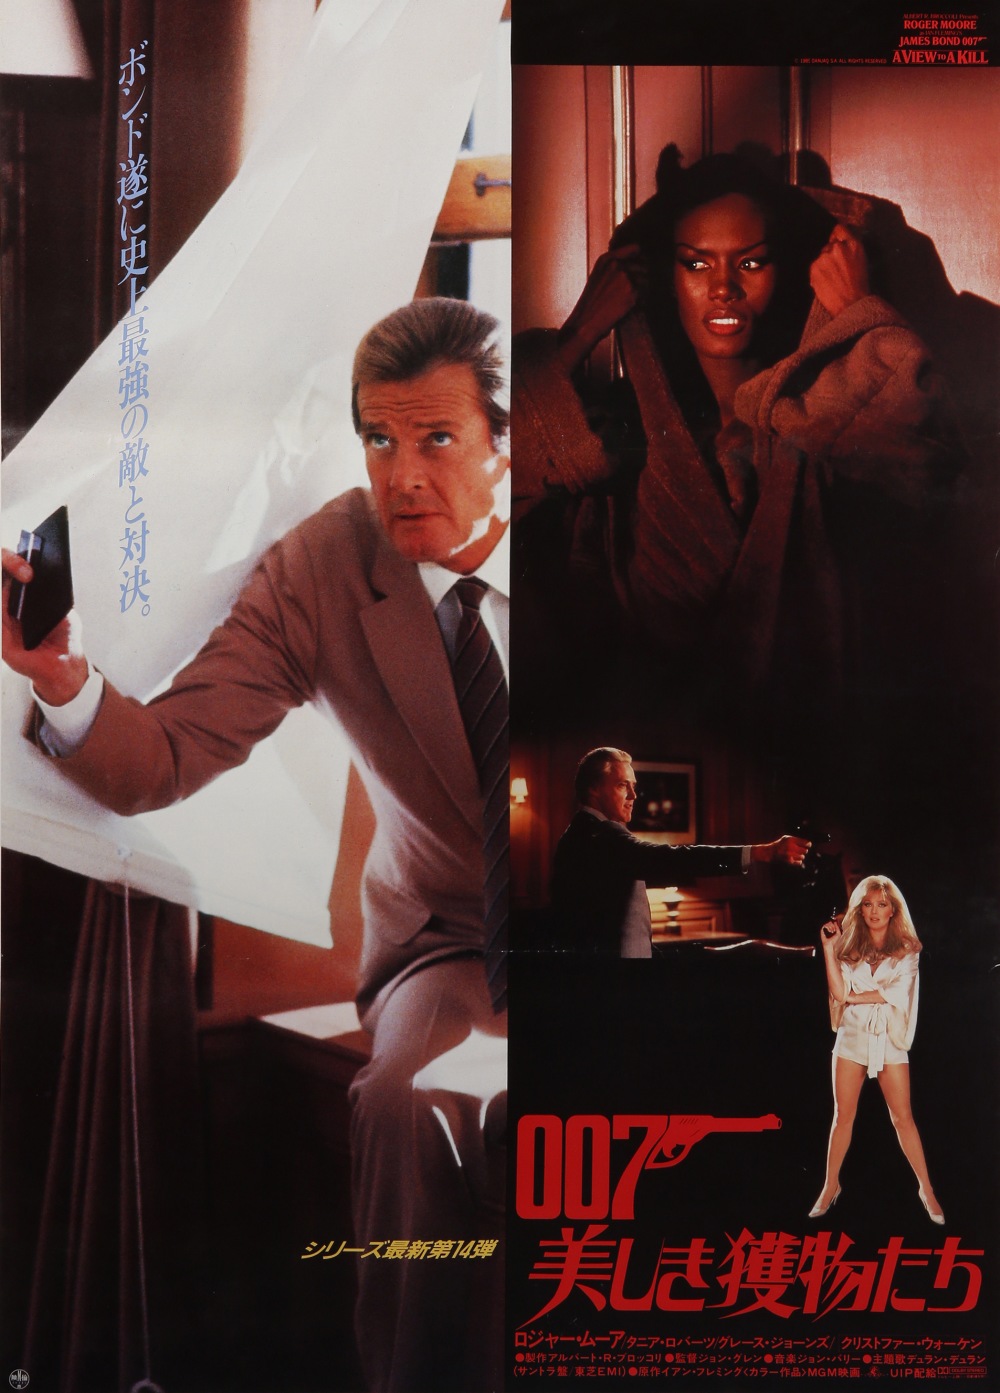 TWO JAPANESE JAMES BOND 007 POSTERS SHOWA ERA, 1981 Both featuring Roger Moore, the first of A